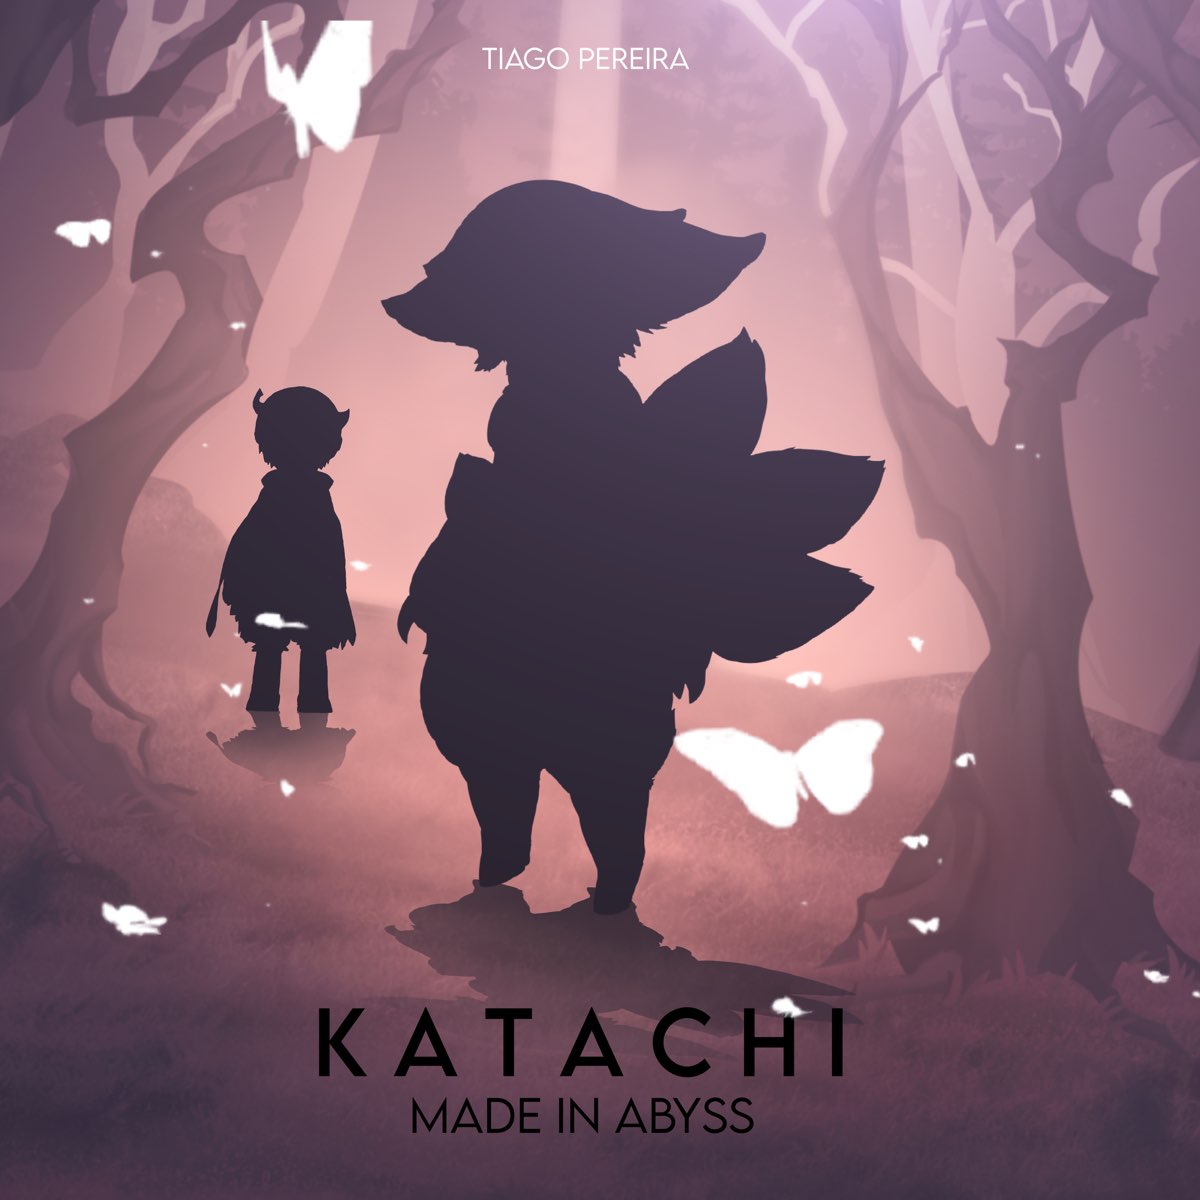 Katachi made in abyss